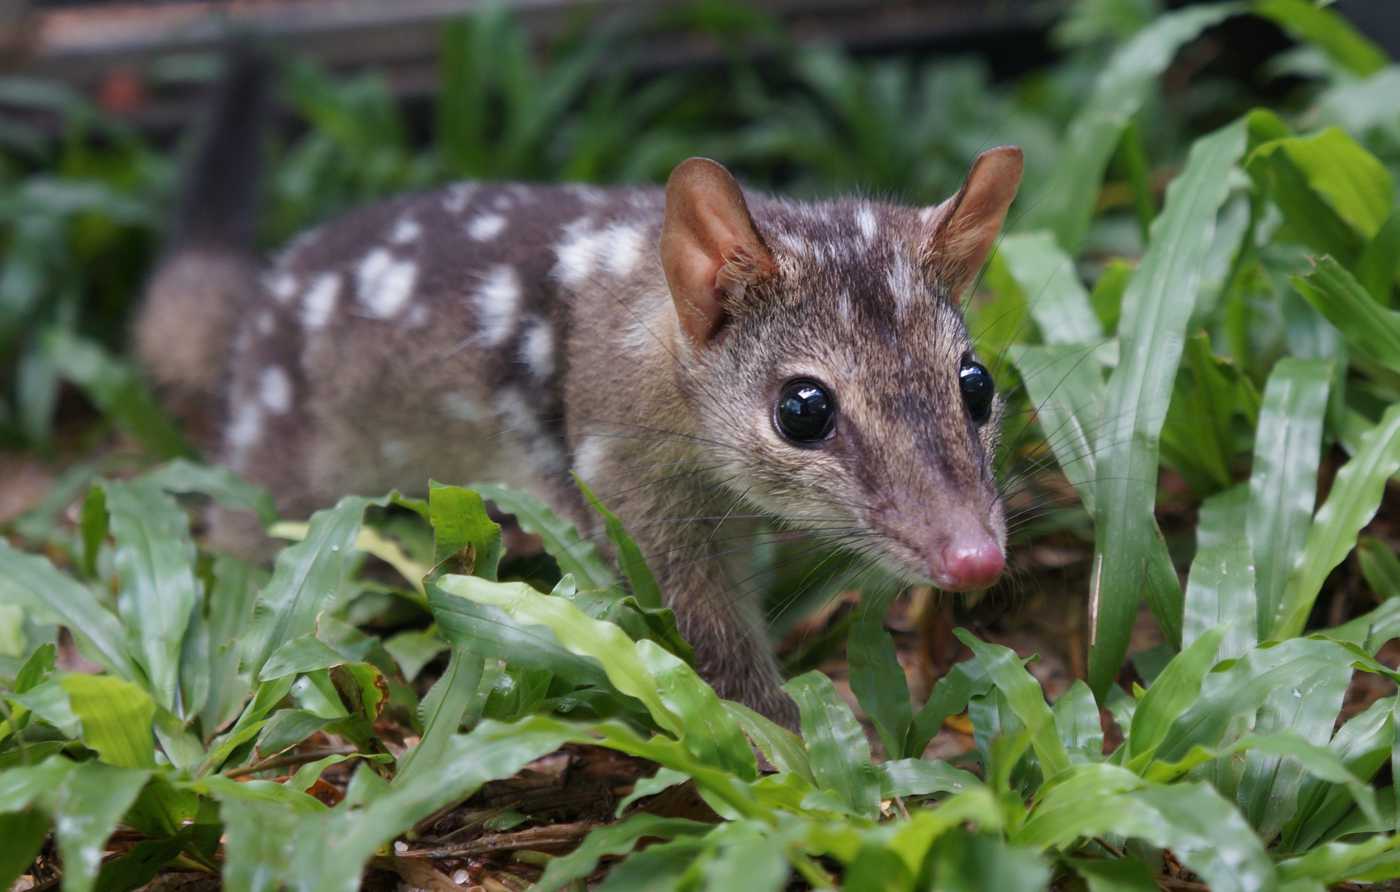 On the hunt for smart quolls